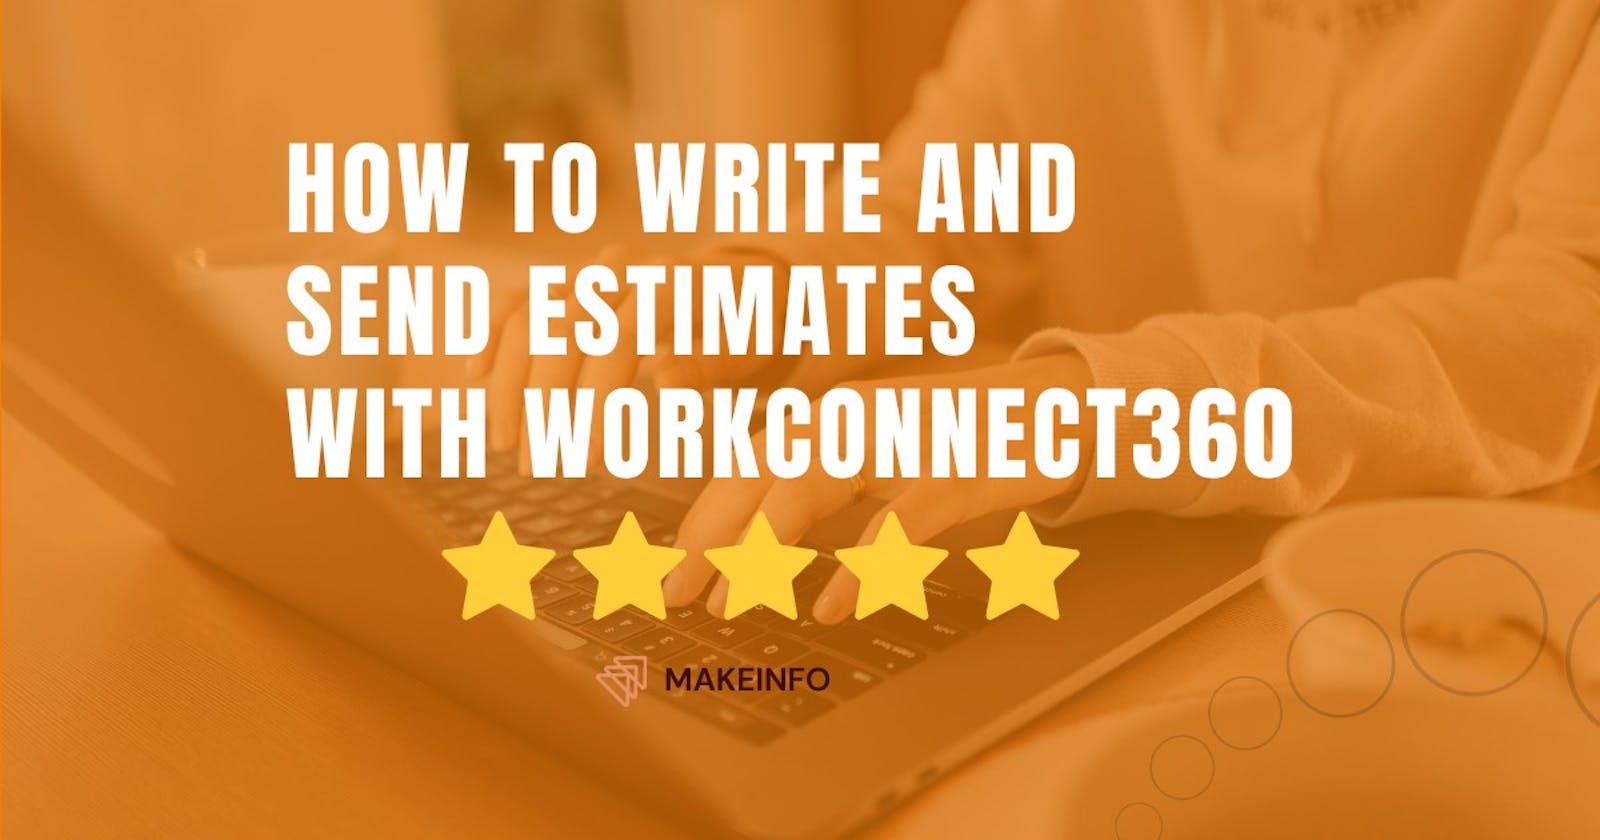 How to write and send estimates with WorkConnect360